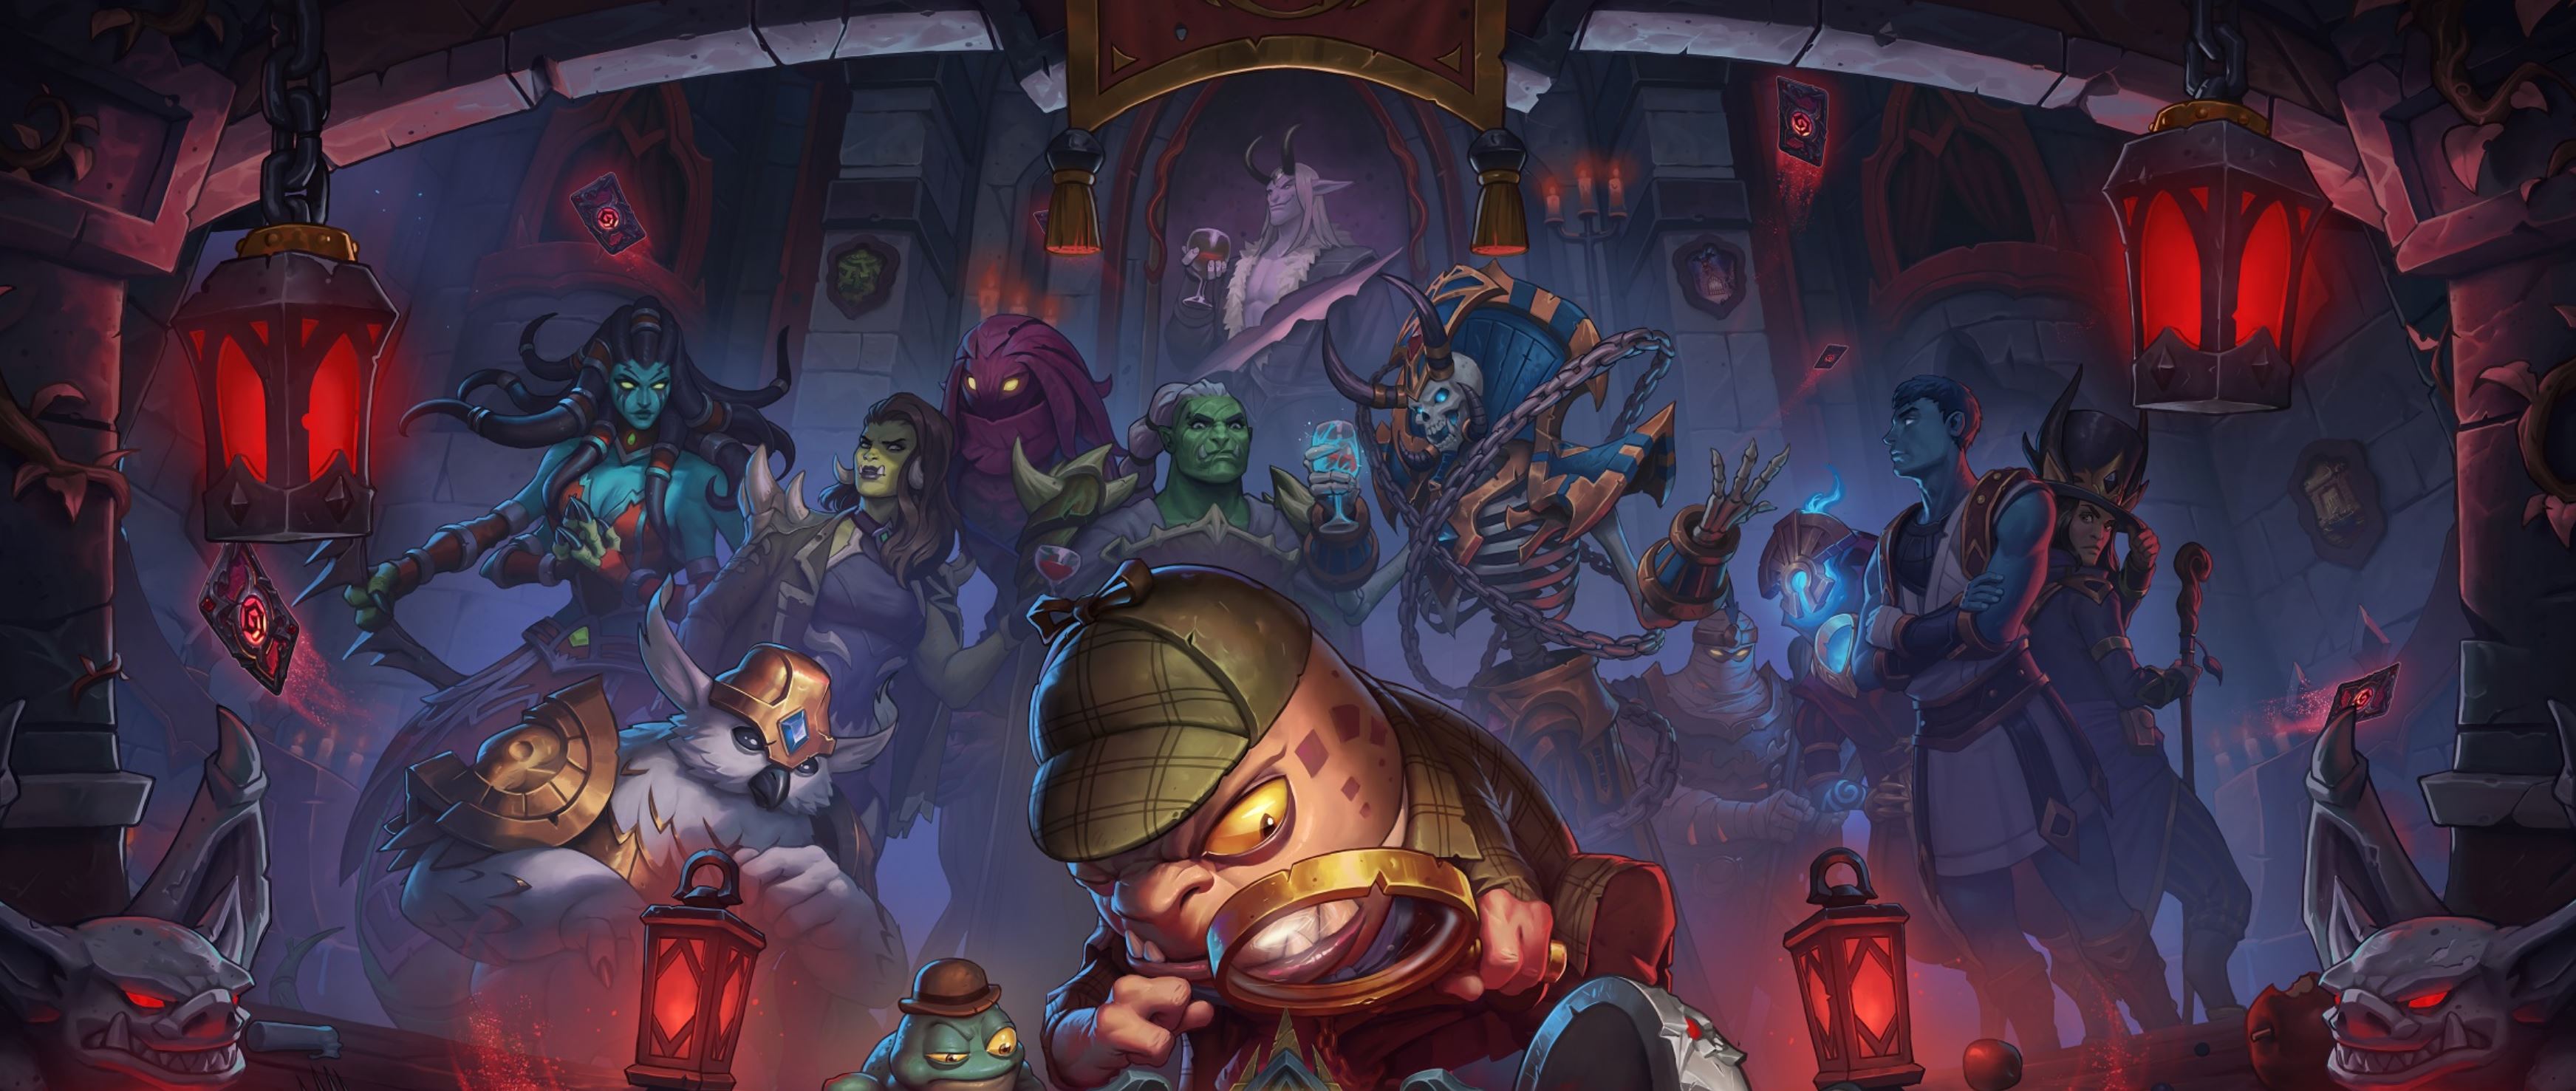 Hearthstone: Best at Castle Nathria Decks For the New Expansion | of Geek